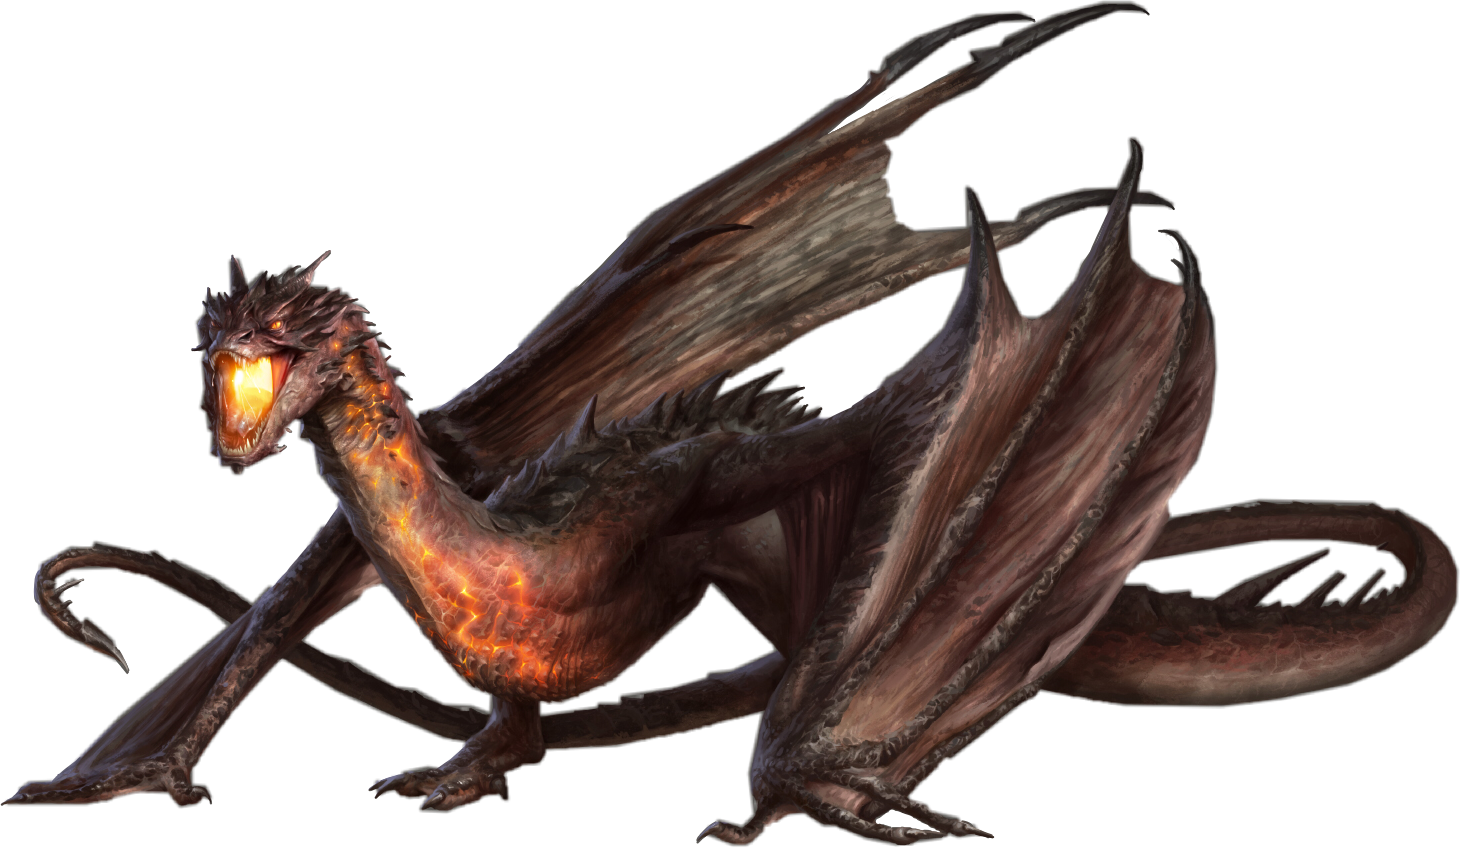 Smaug, The Hobbit (Films) Wiki